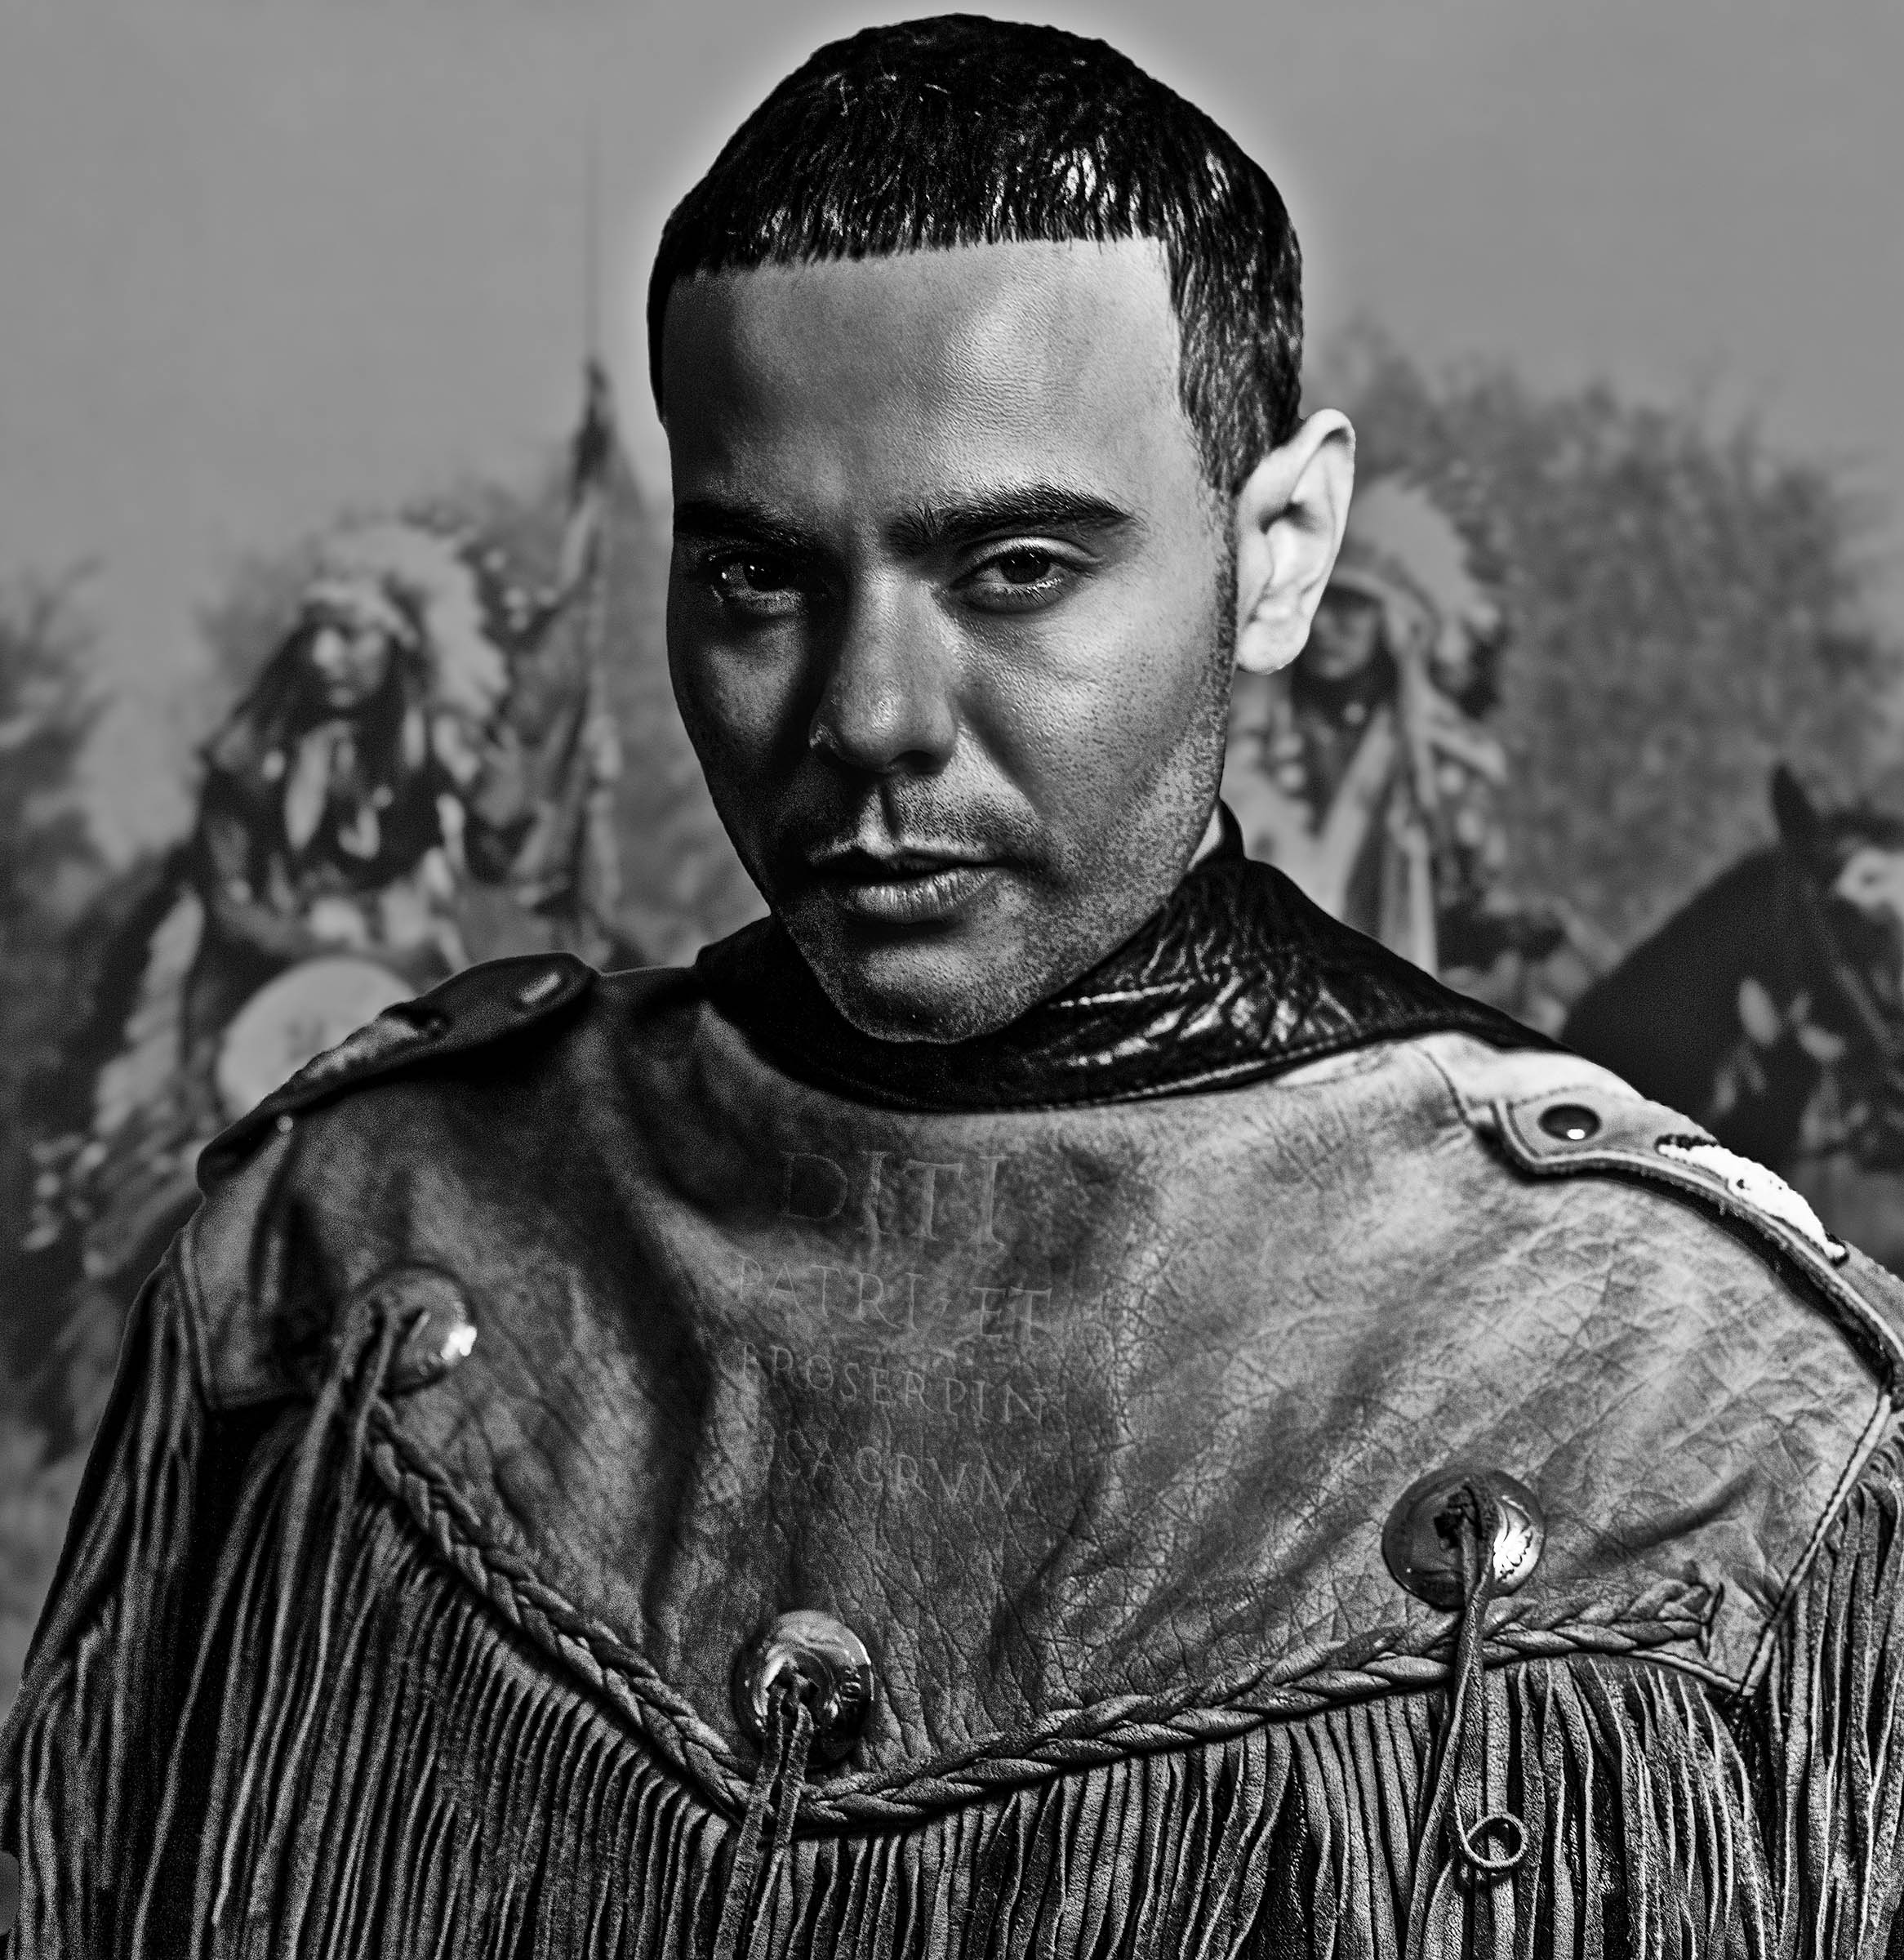 Father Robbie Santana Pater Pax Catolico tames the Sioux Nation with Love and Peace Portrait by Wick Beavers NYC Best Portrait Photographer 7 Cities of Cibola